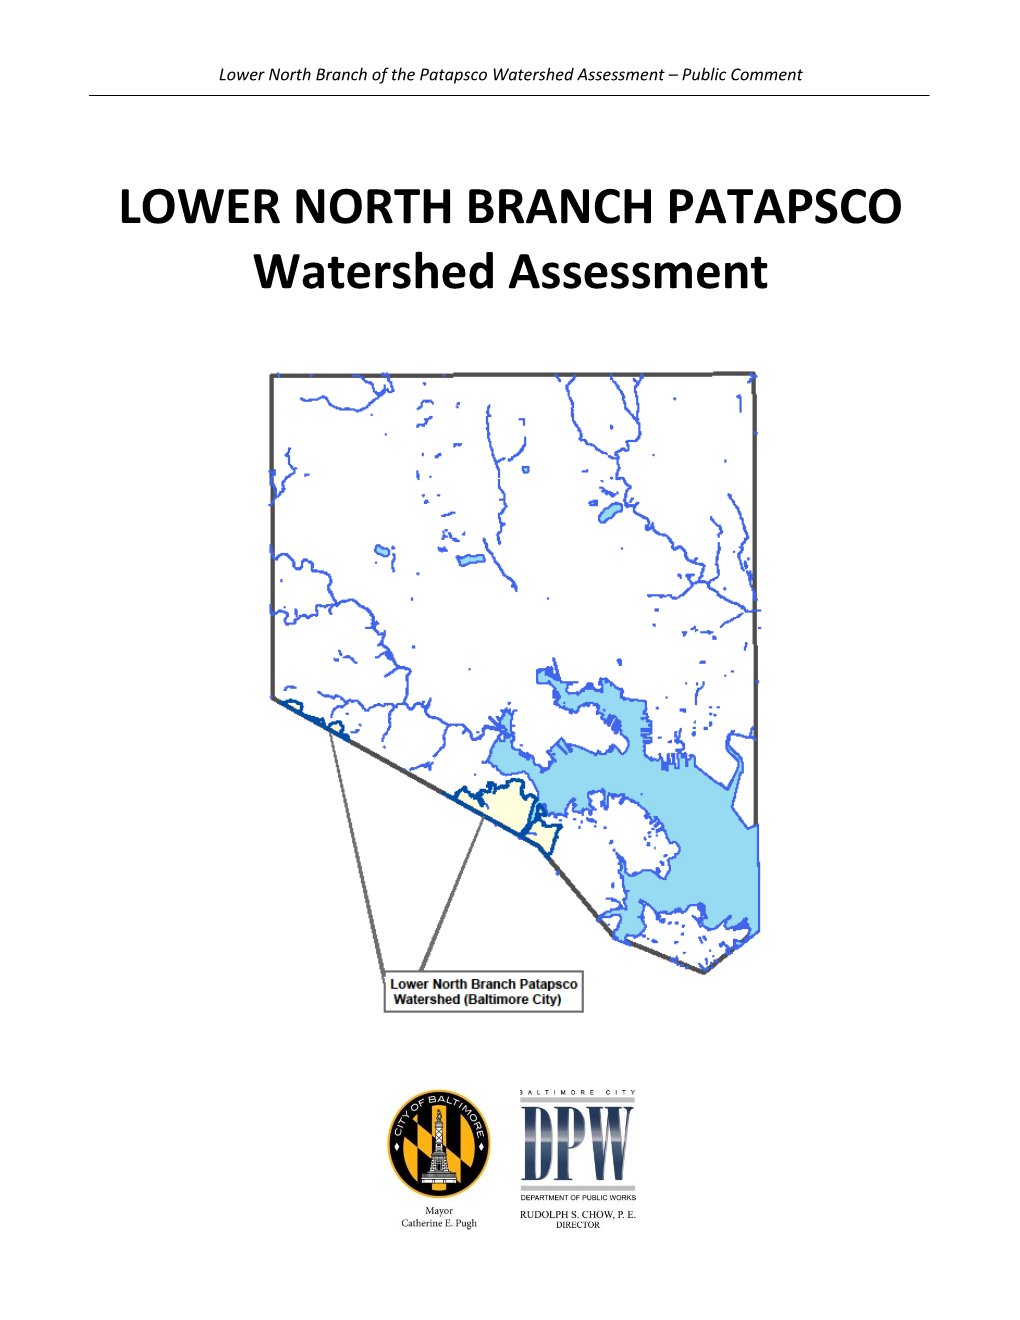 LOWER NORTH BRANCH PATAPSCO Watershed Assessment